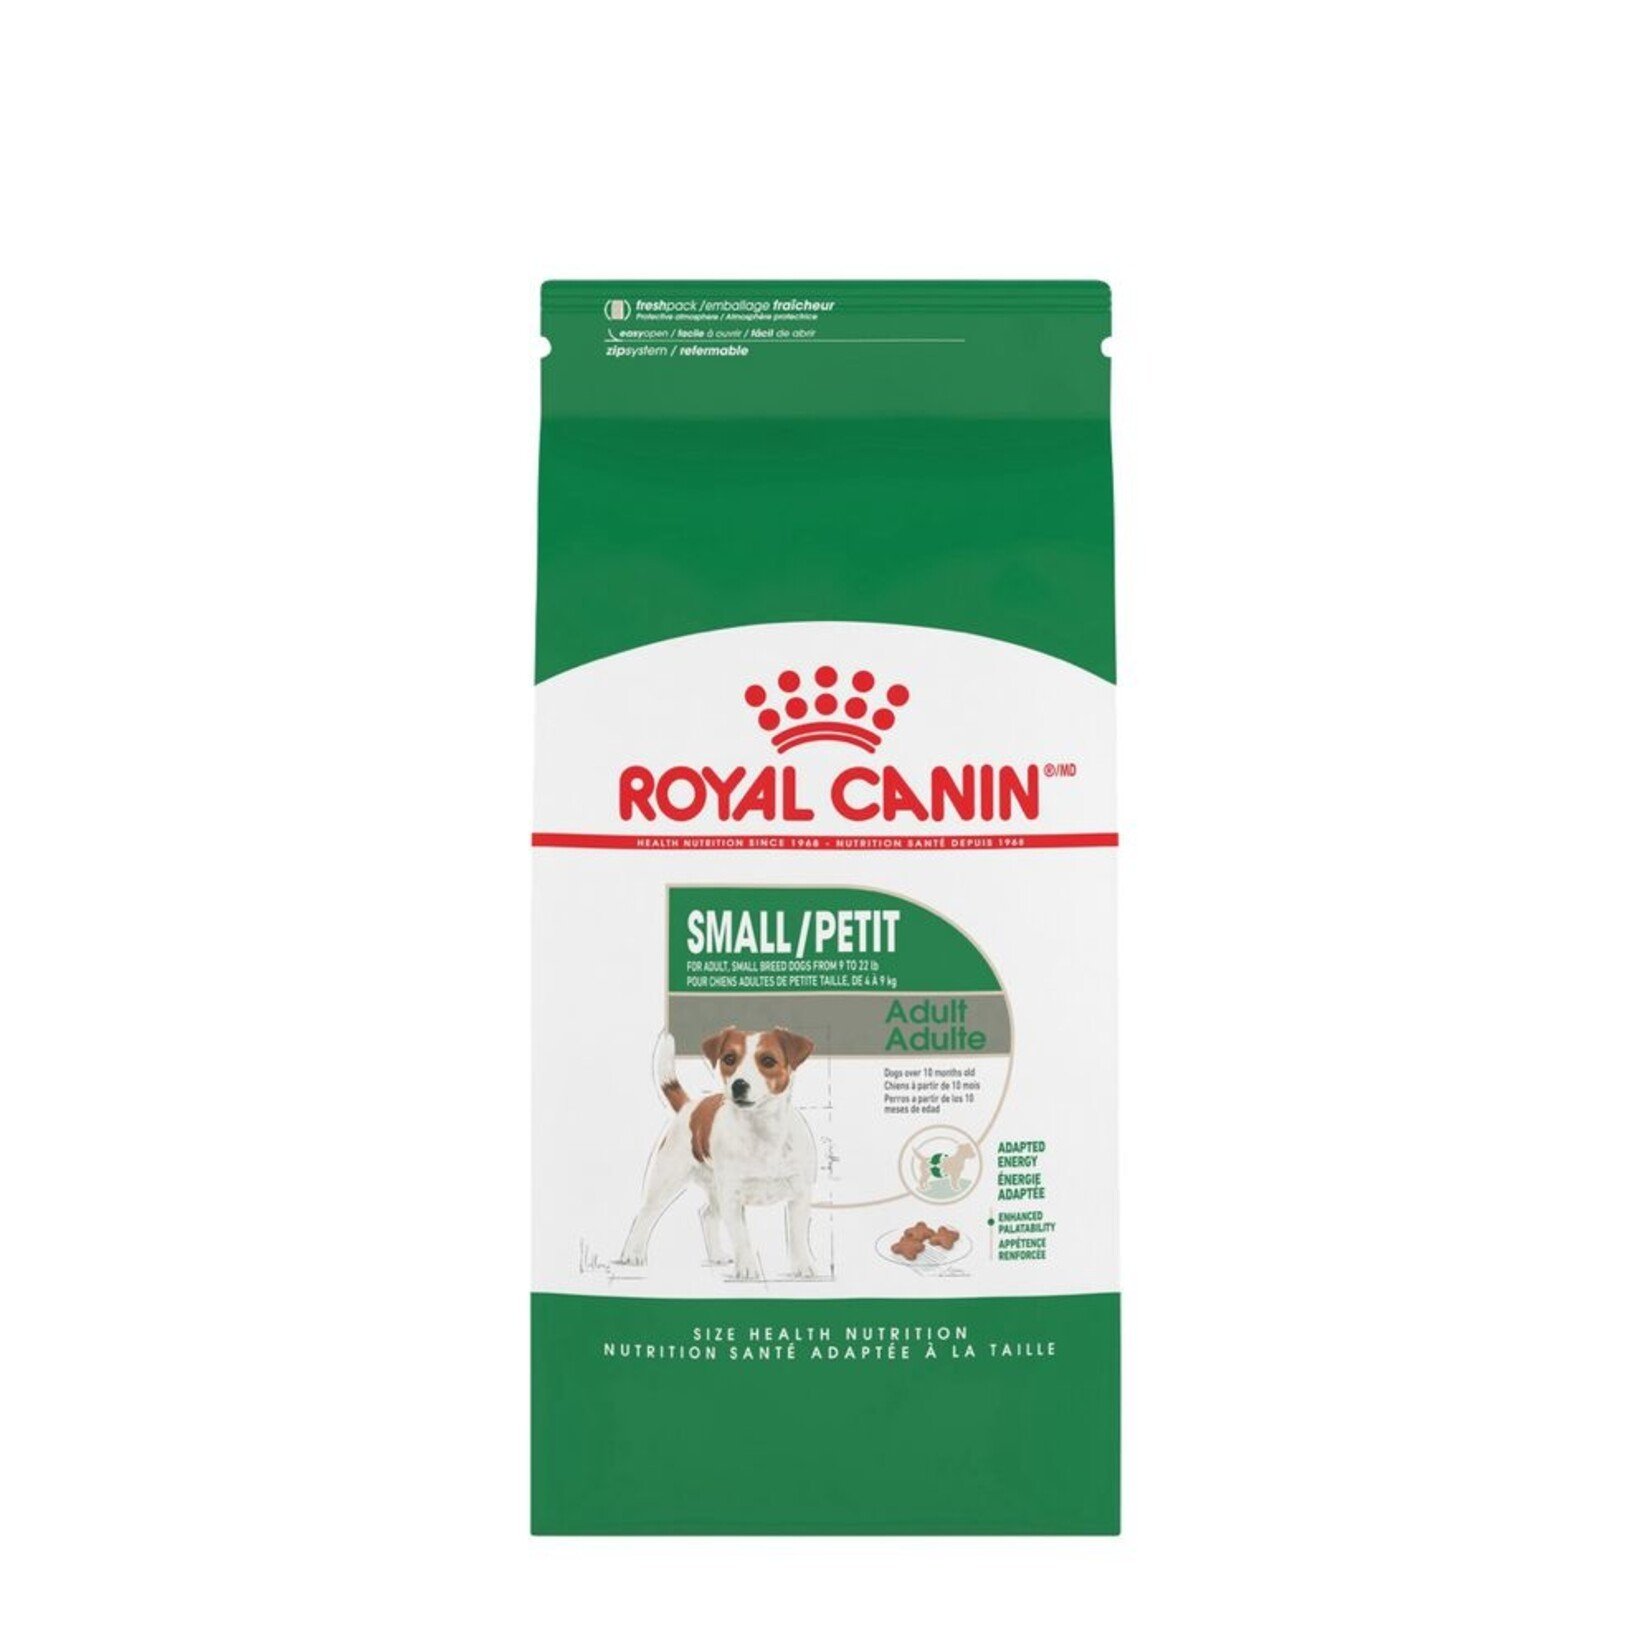 ROYAL CANIN ROYAL CANIN PETIT CHIEN ADULTE 6.36 KG